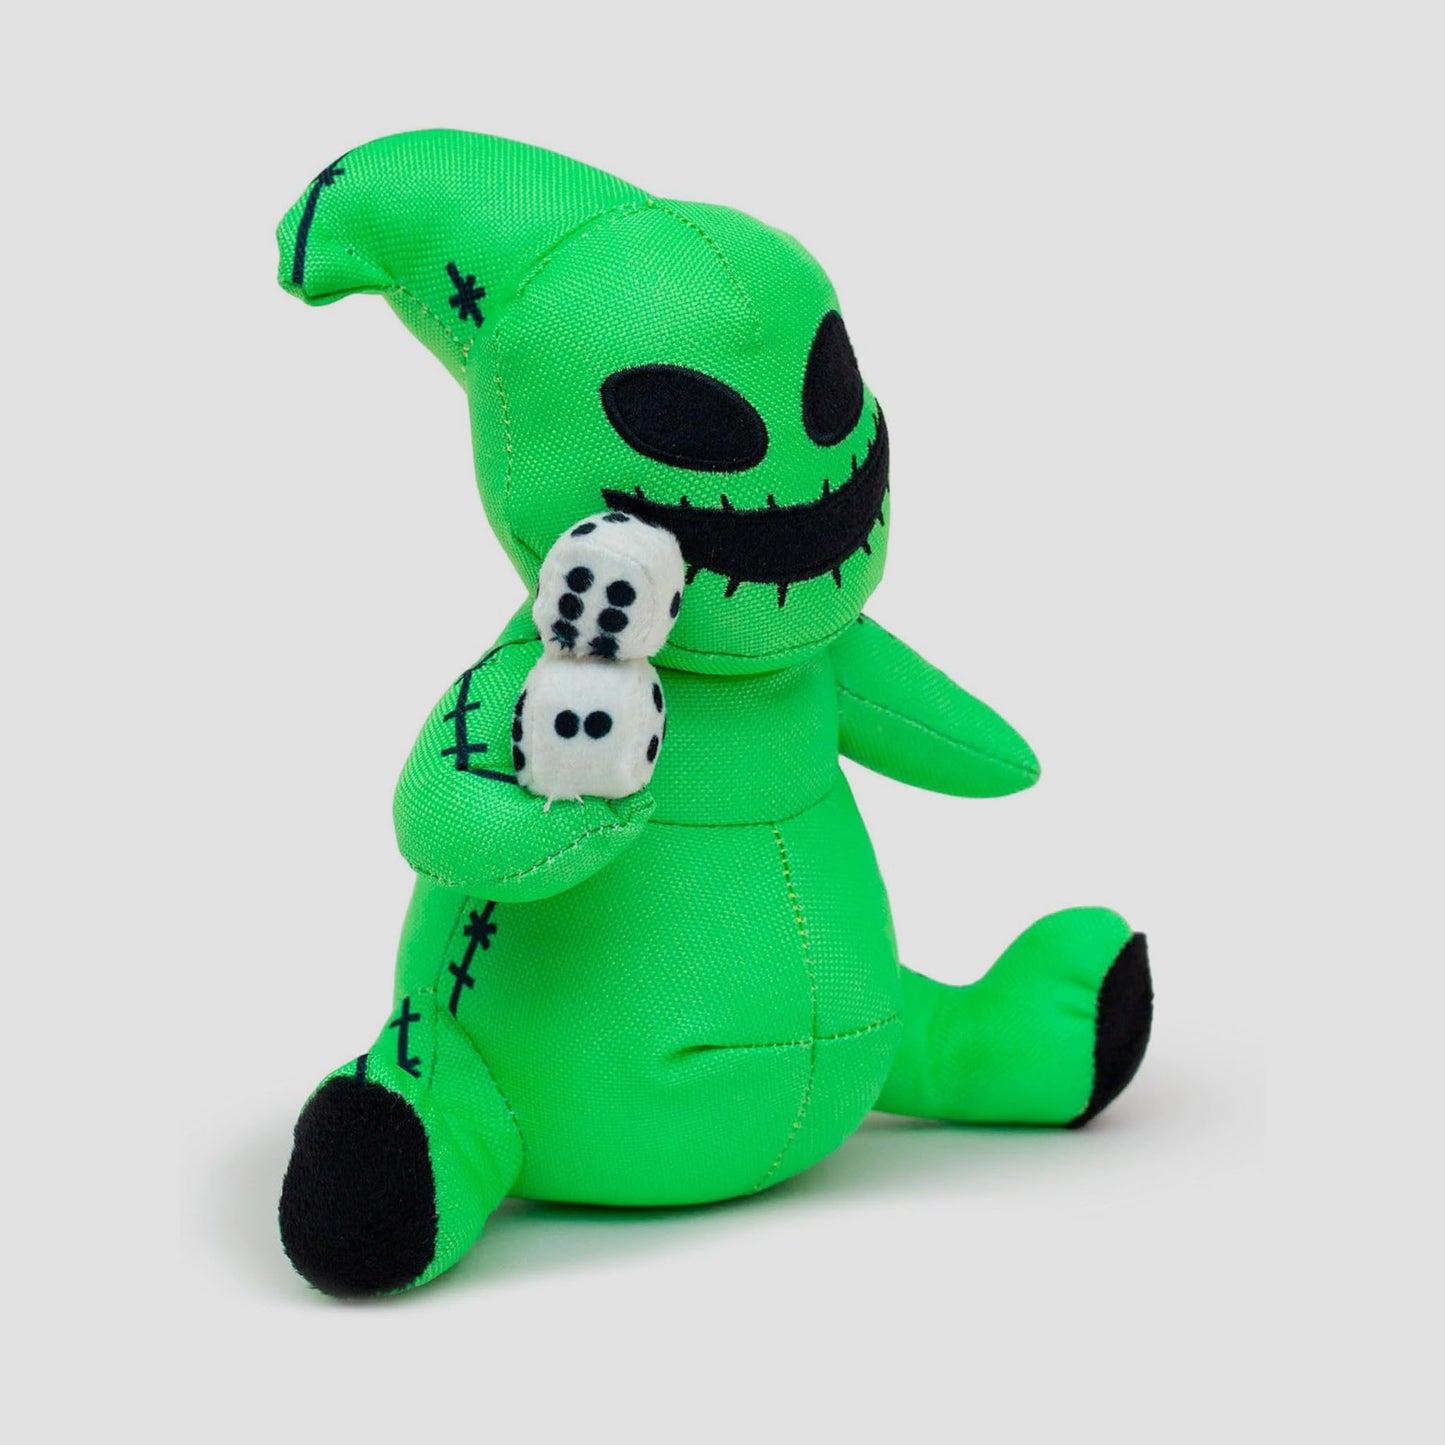 Oogie Boogie (The Nightmare Before Christmas) Dog Plush Squeaker Toy